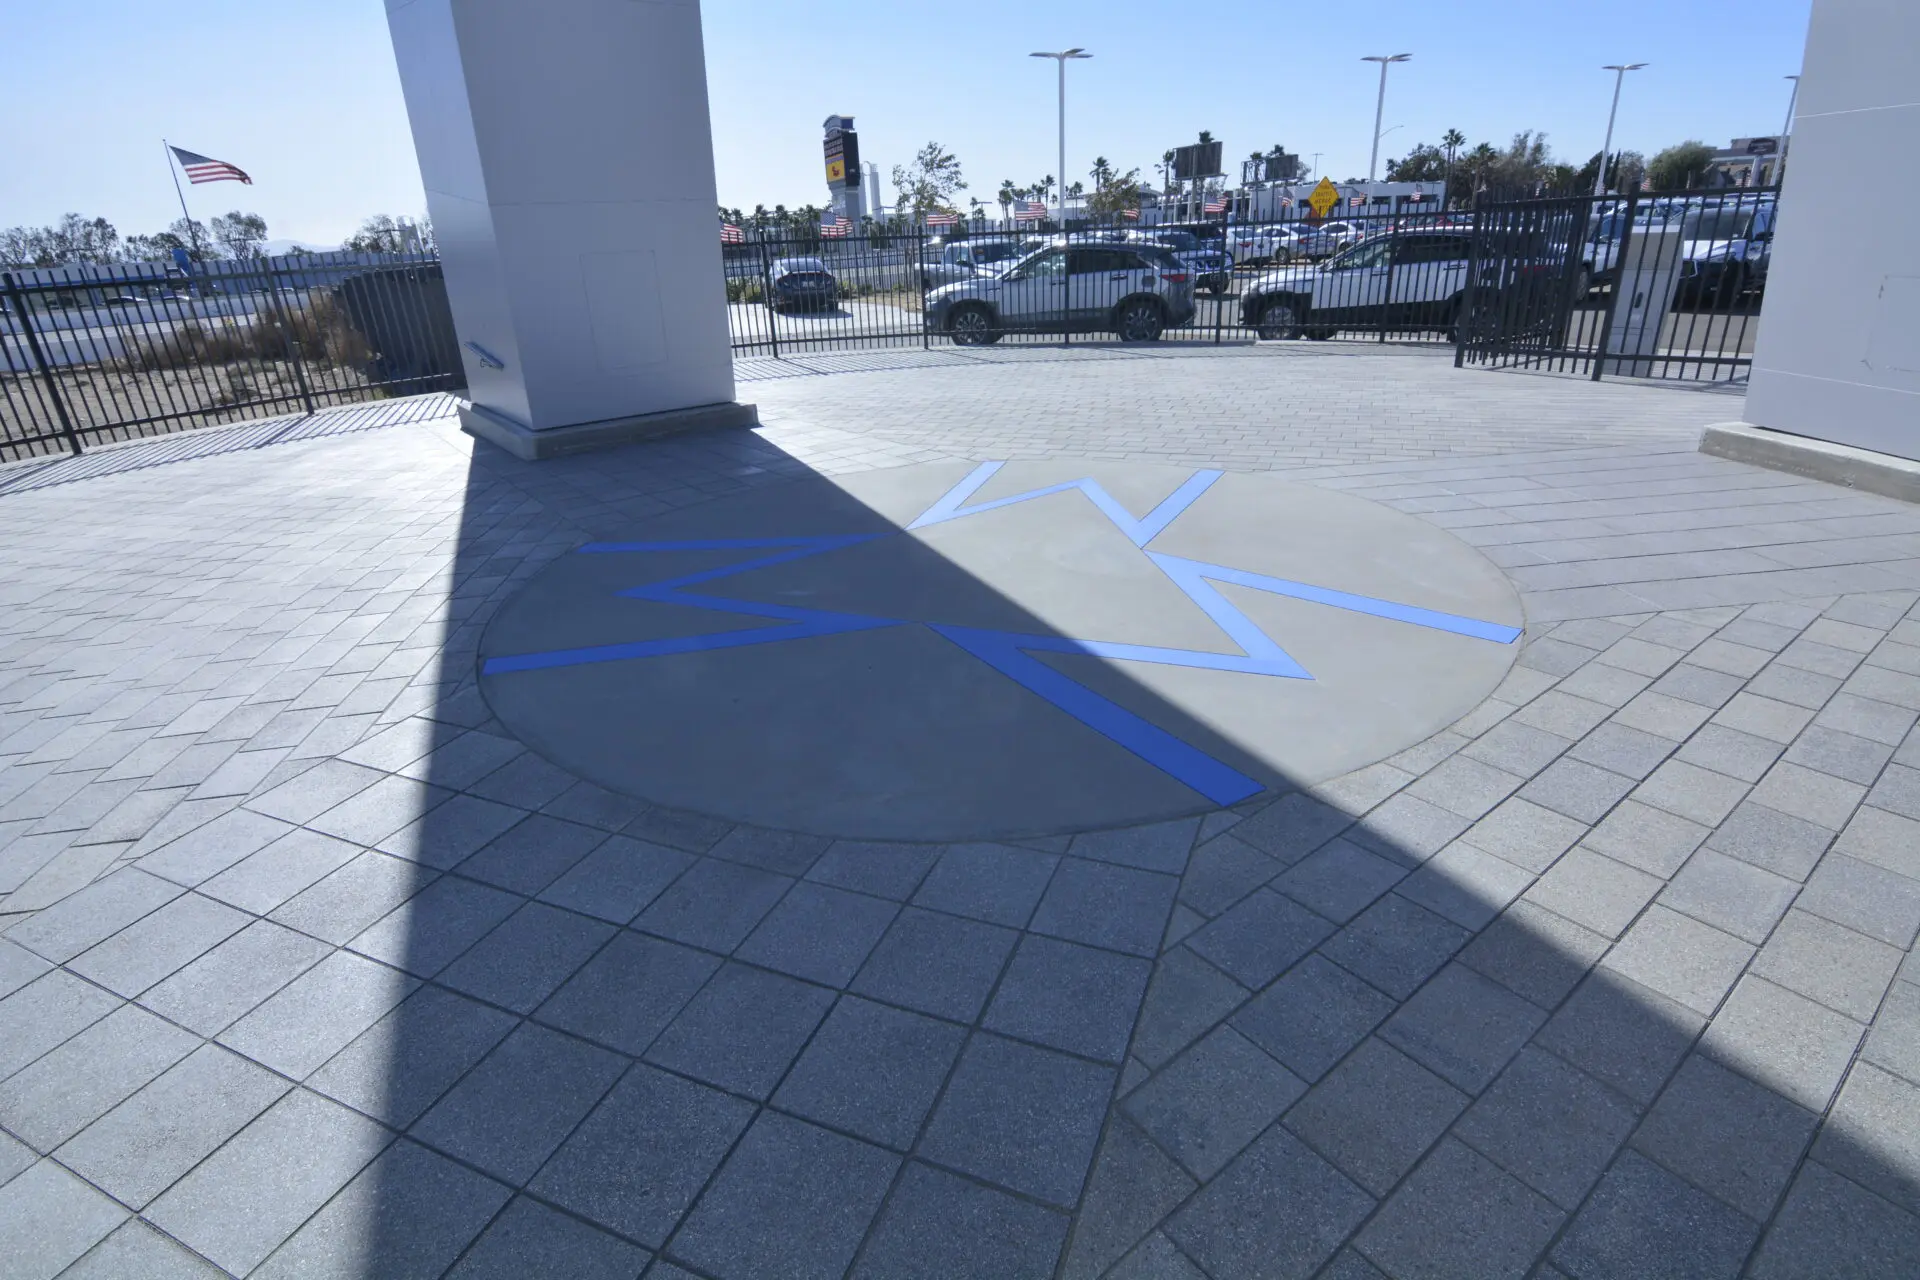 A floor design at a building’s outdoor space